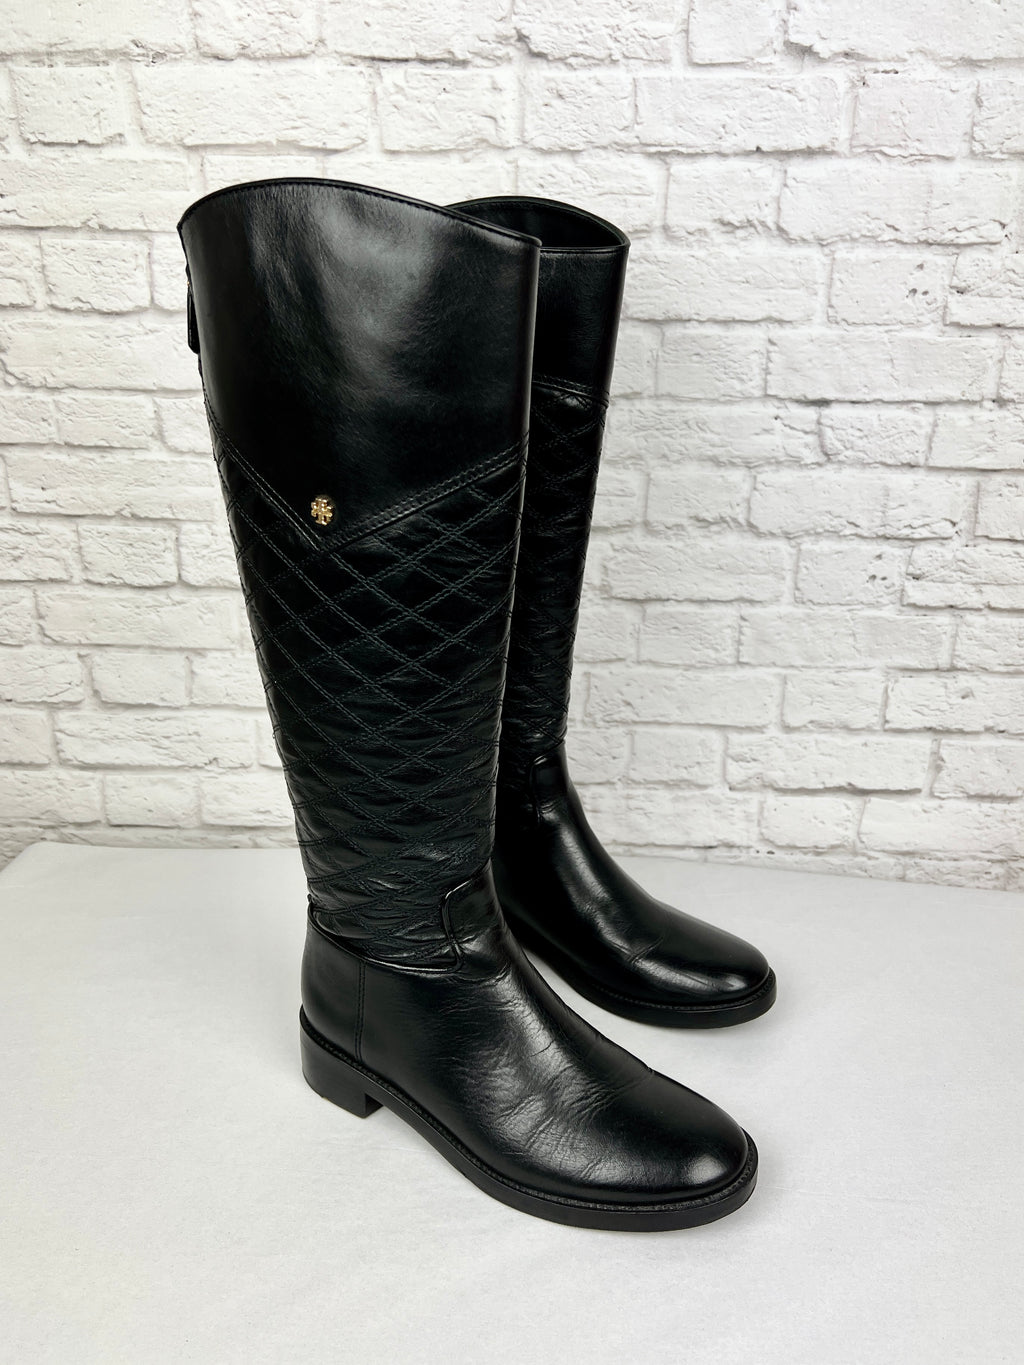 Tory Burch Claremont Quilted Riding Boots, Size 36.5, Black